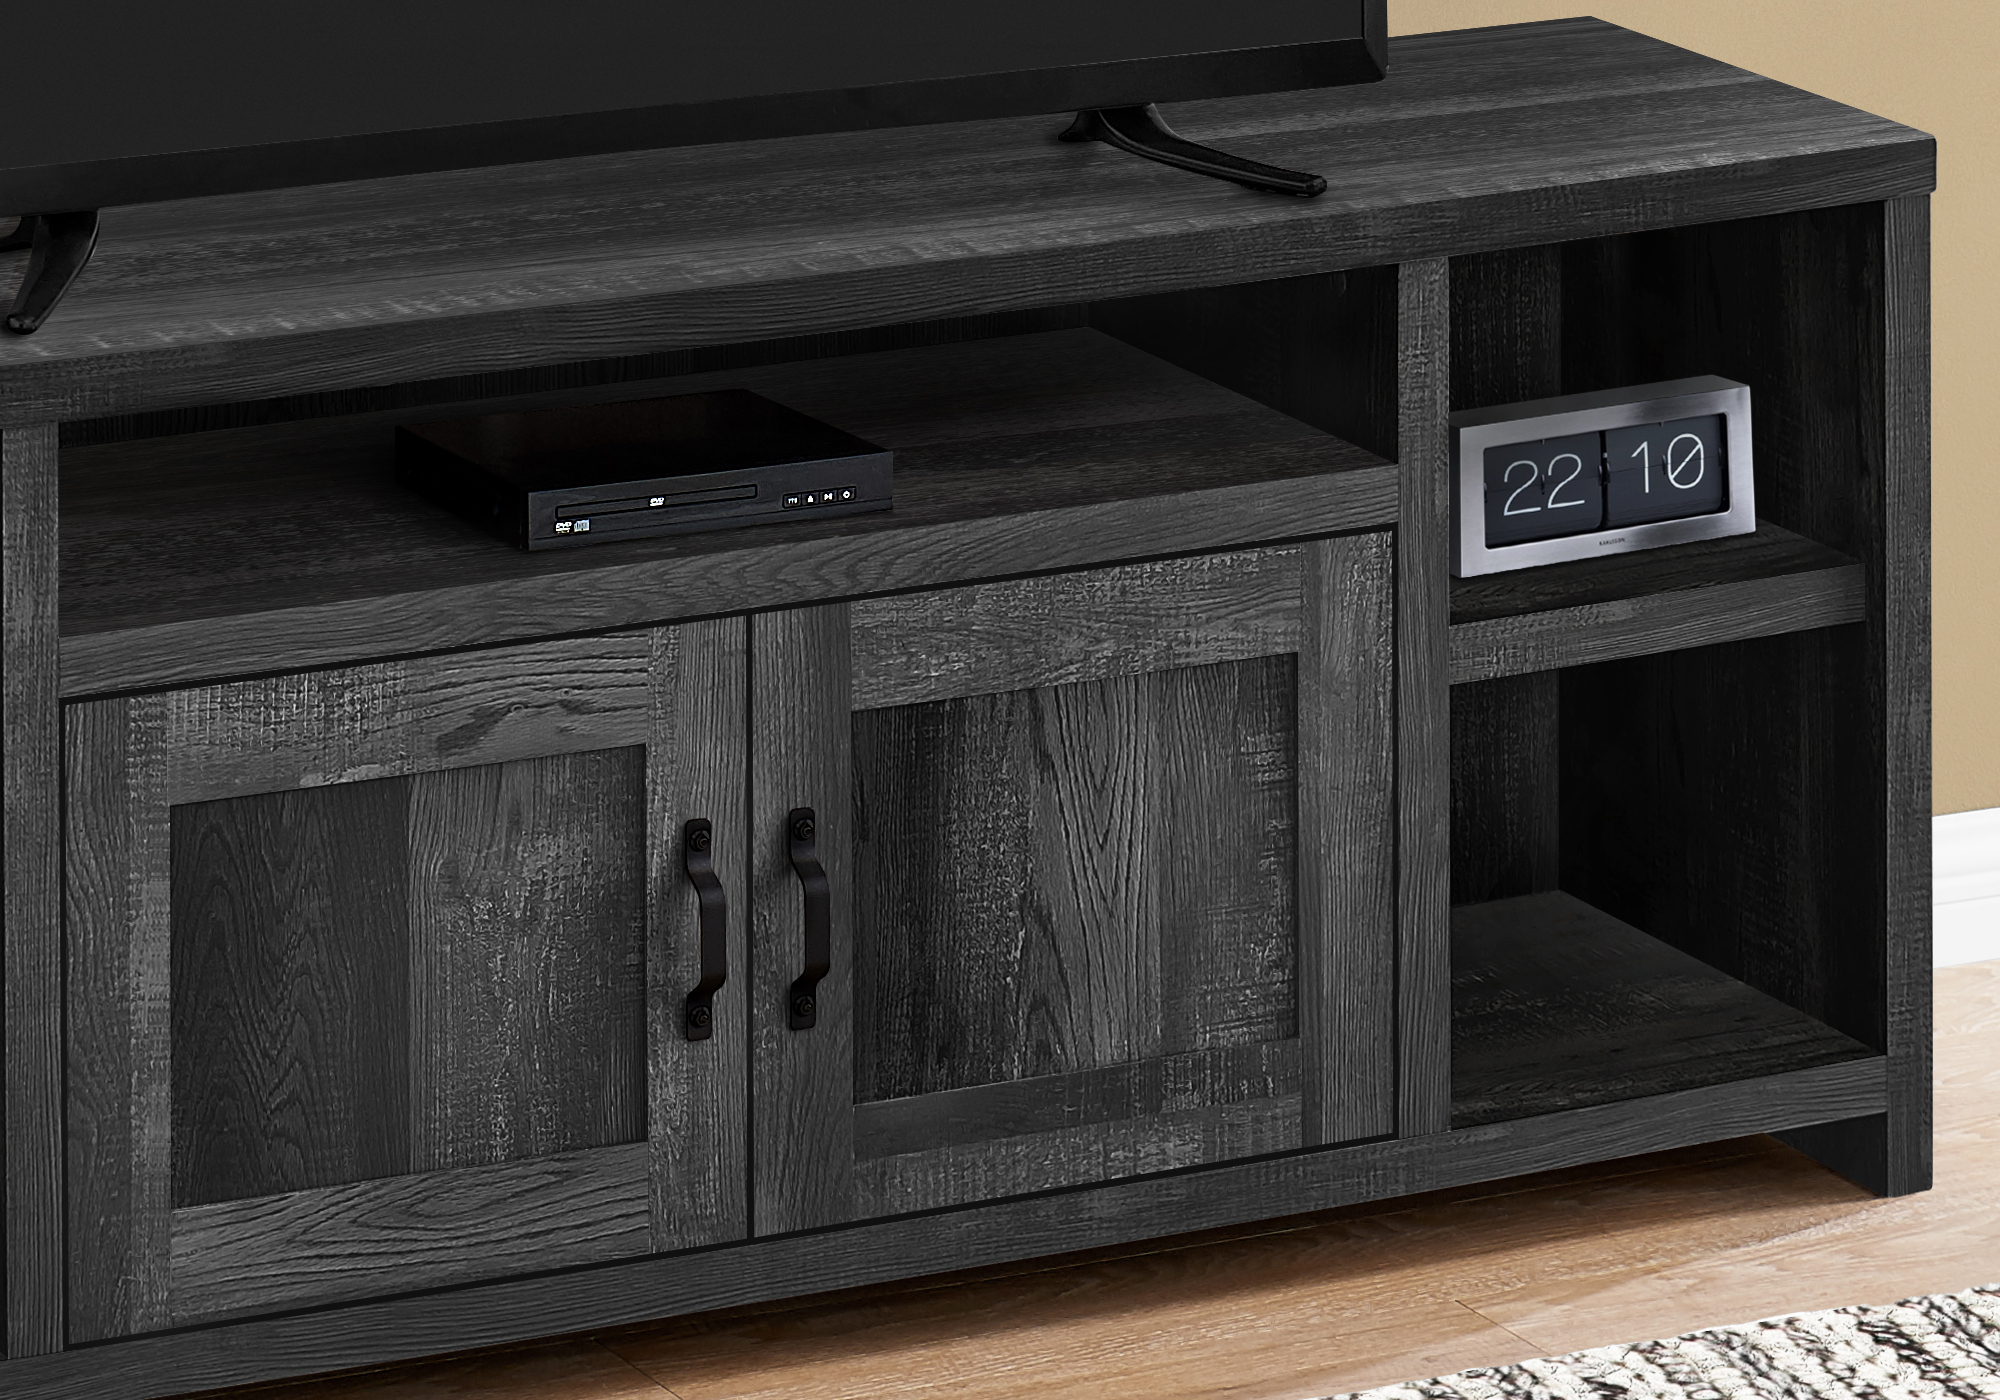 TV STAND - 60"L / BLACK RECLAIMED WOOD-LOOK"